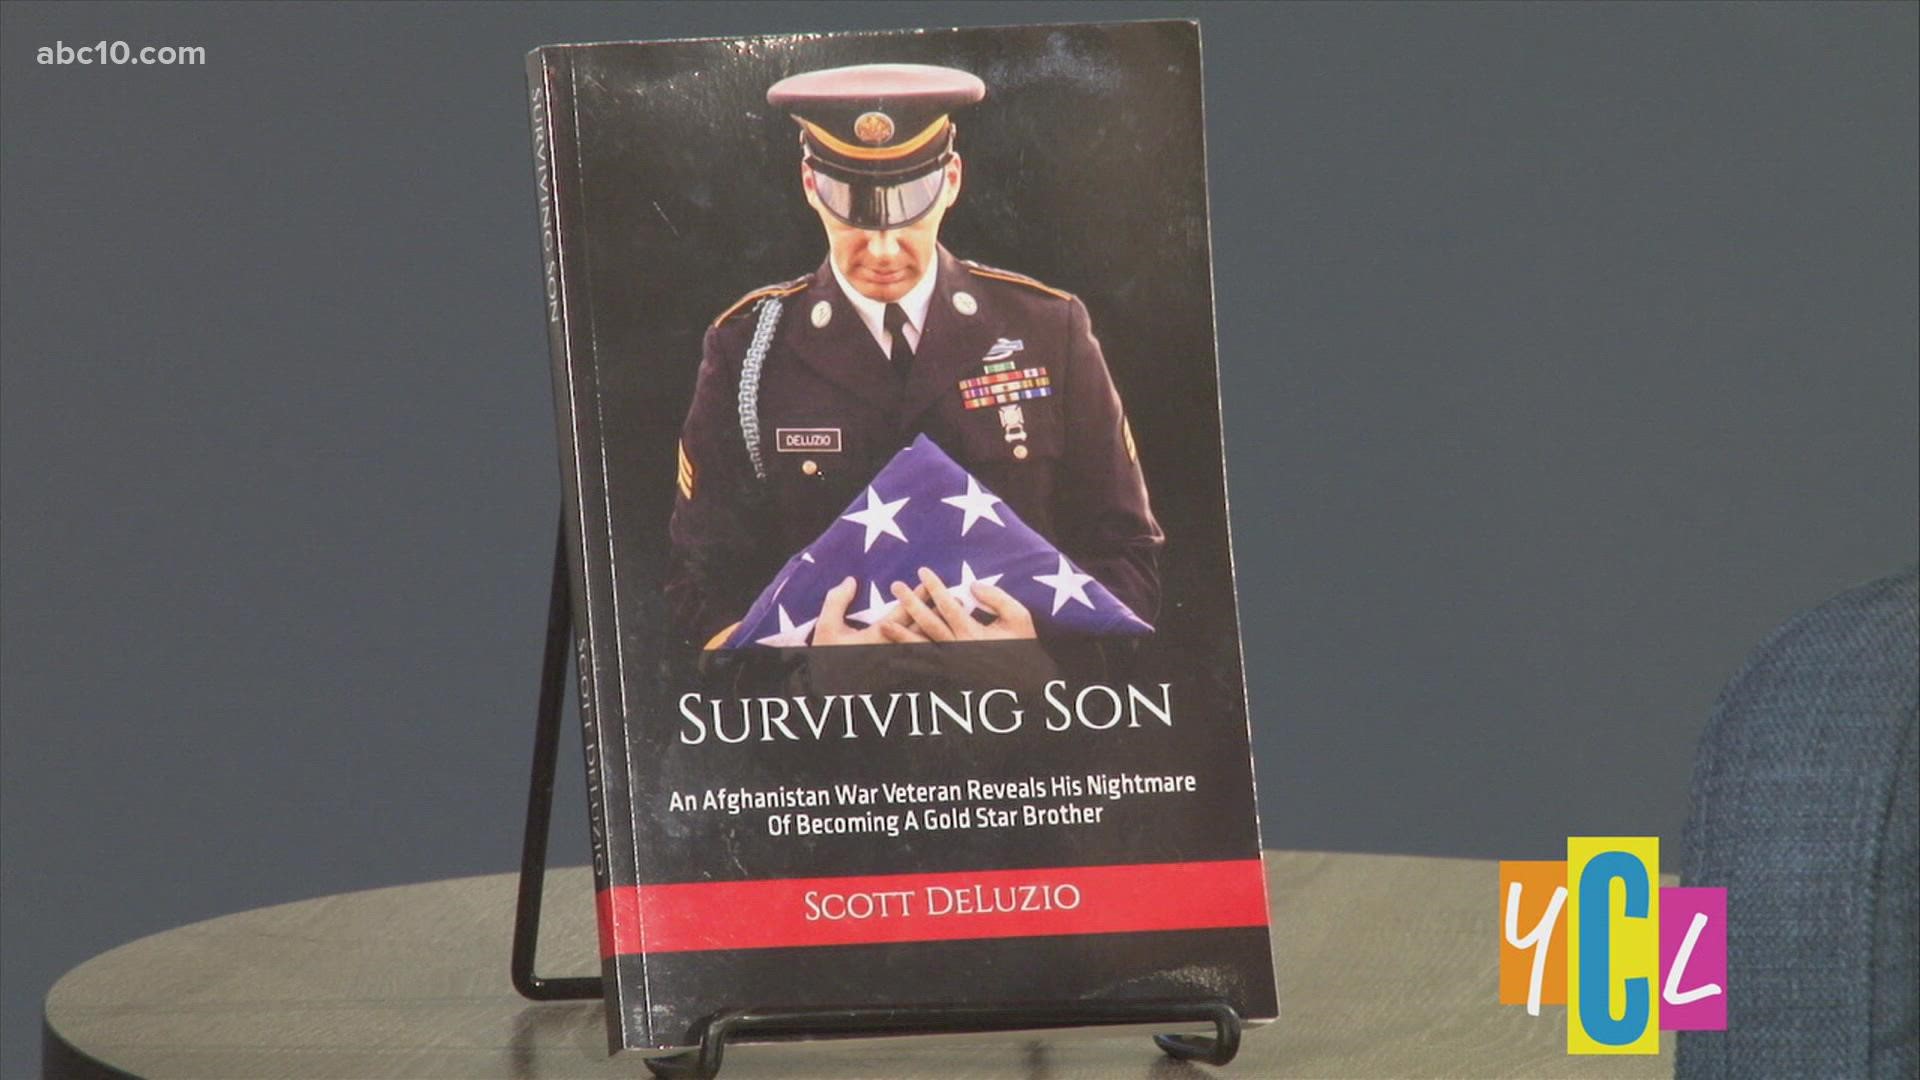 An Afghanistan combat soldier shares his story of losing a brother and life in a war zone in his new book 'Surviving Son'. This segment paid for by Surviving Son.